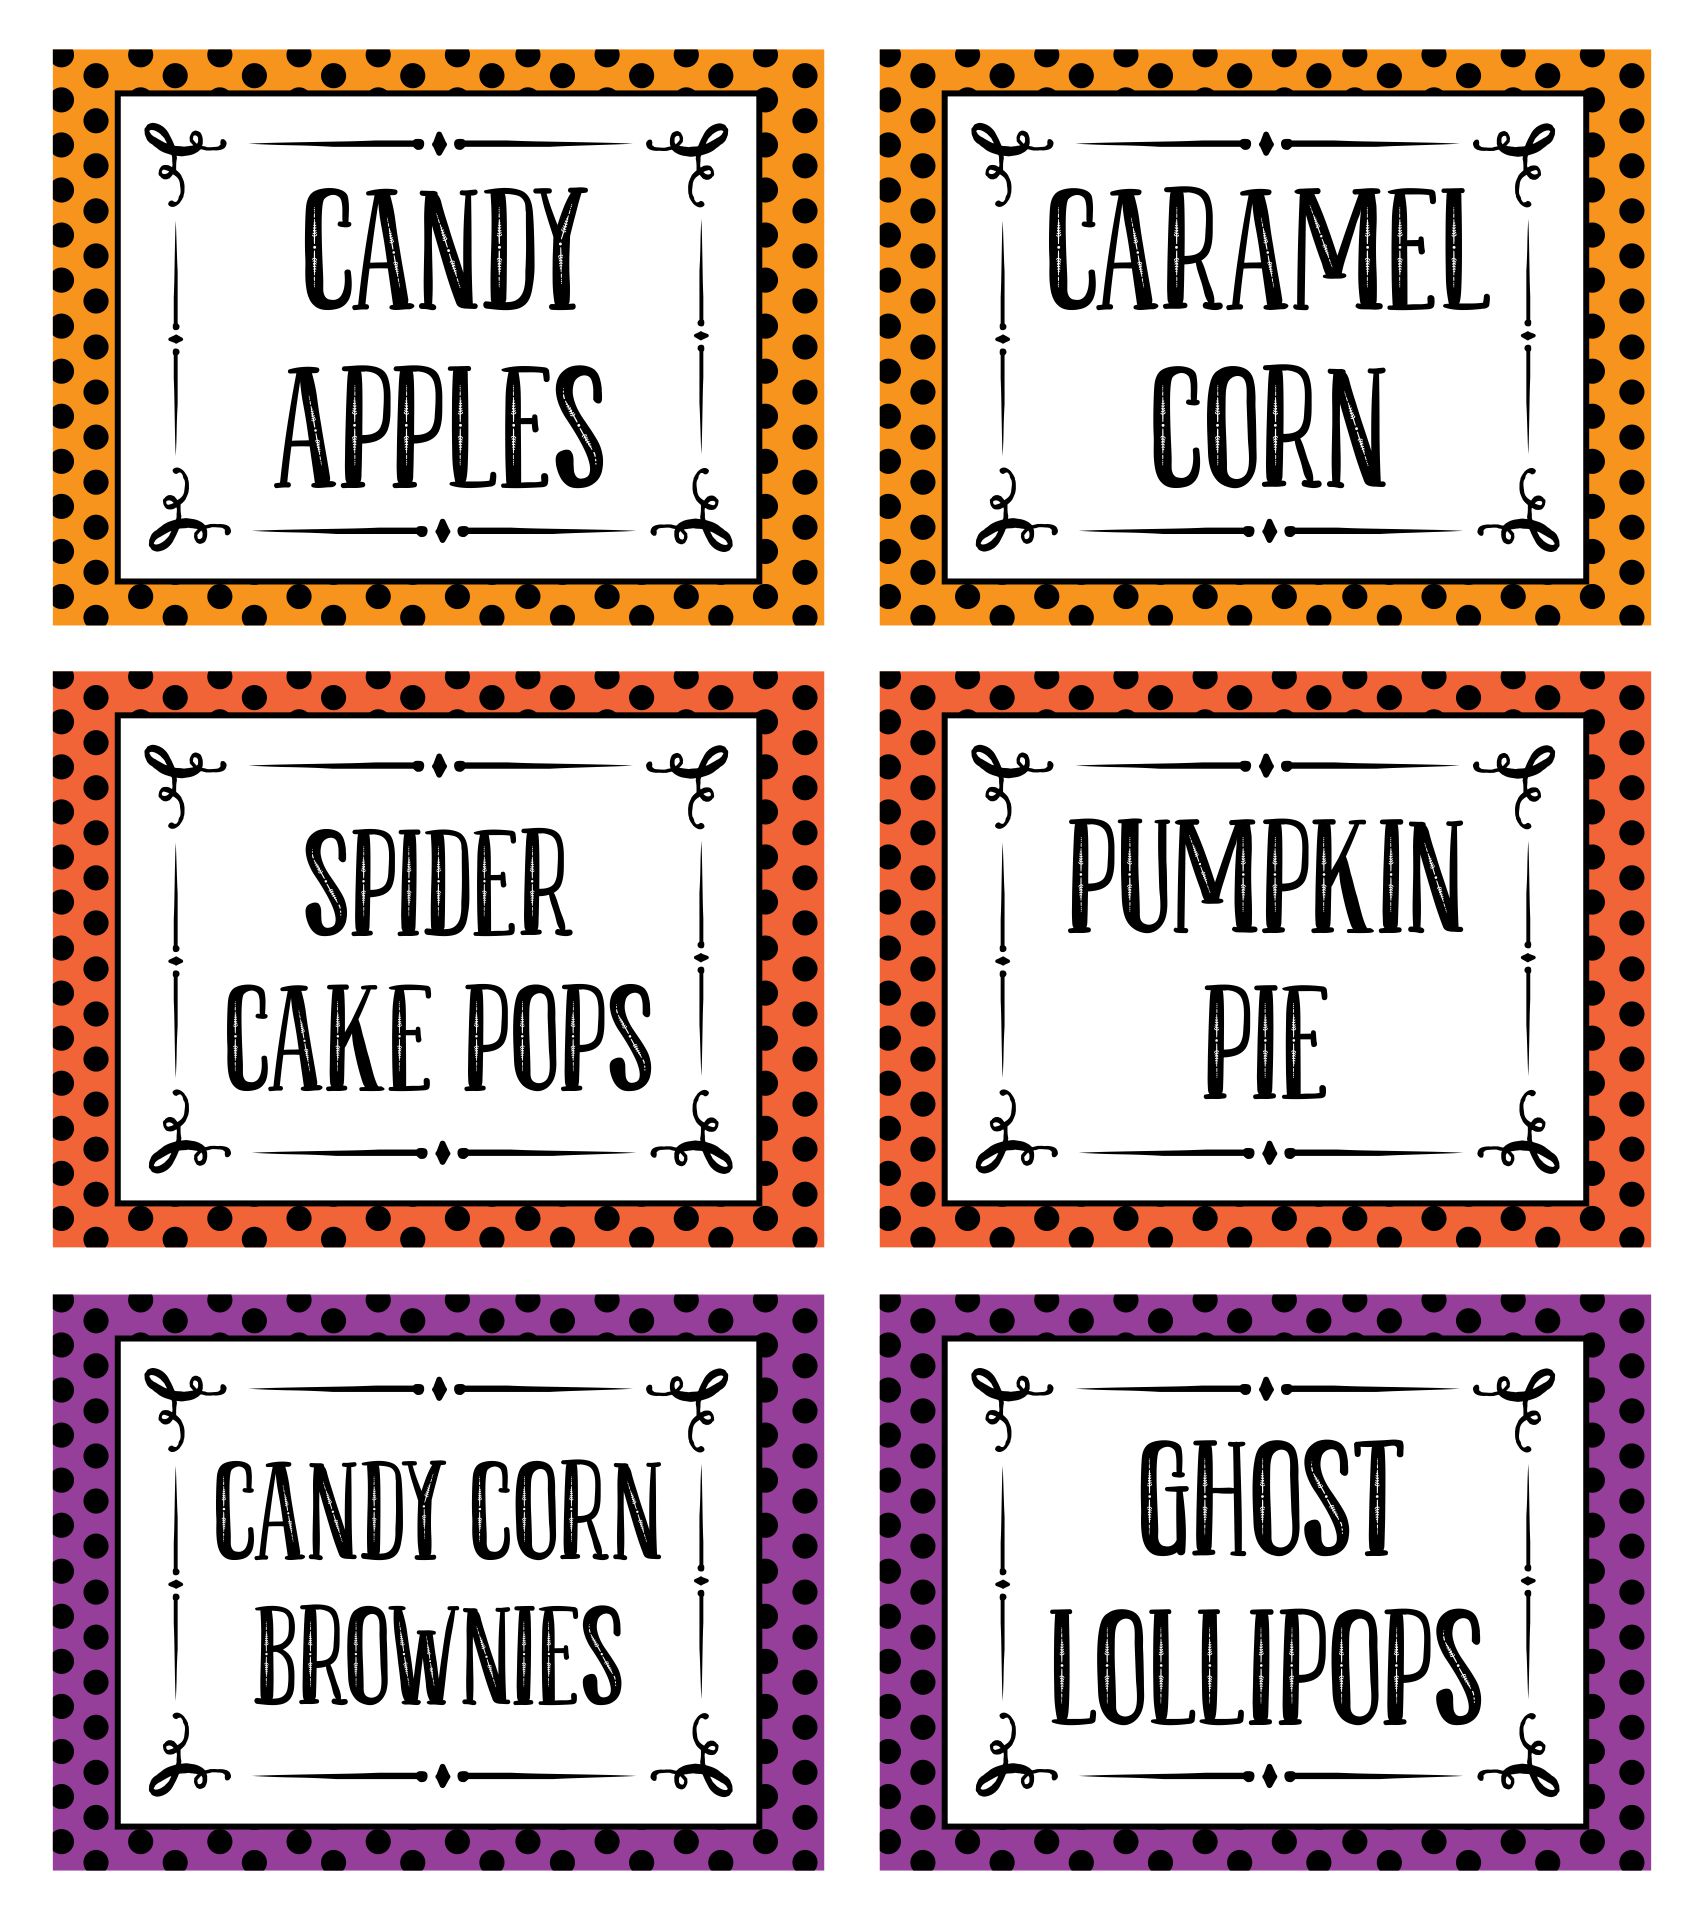 Halloween Food Printable Labels To Freak People Out